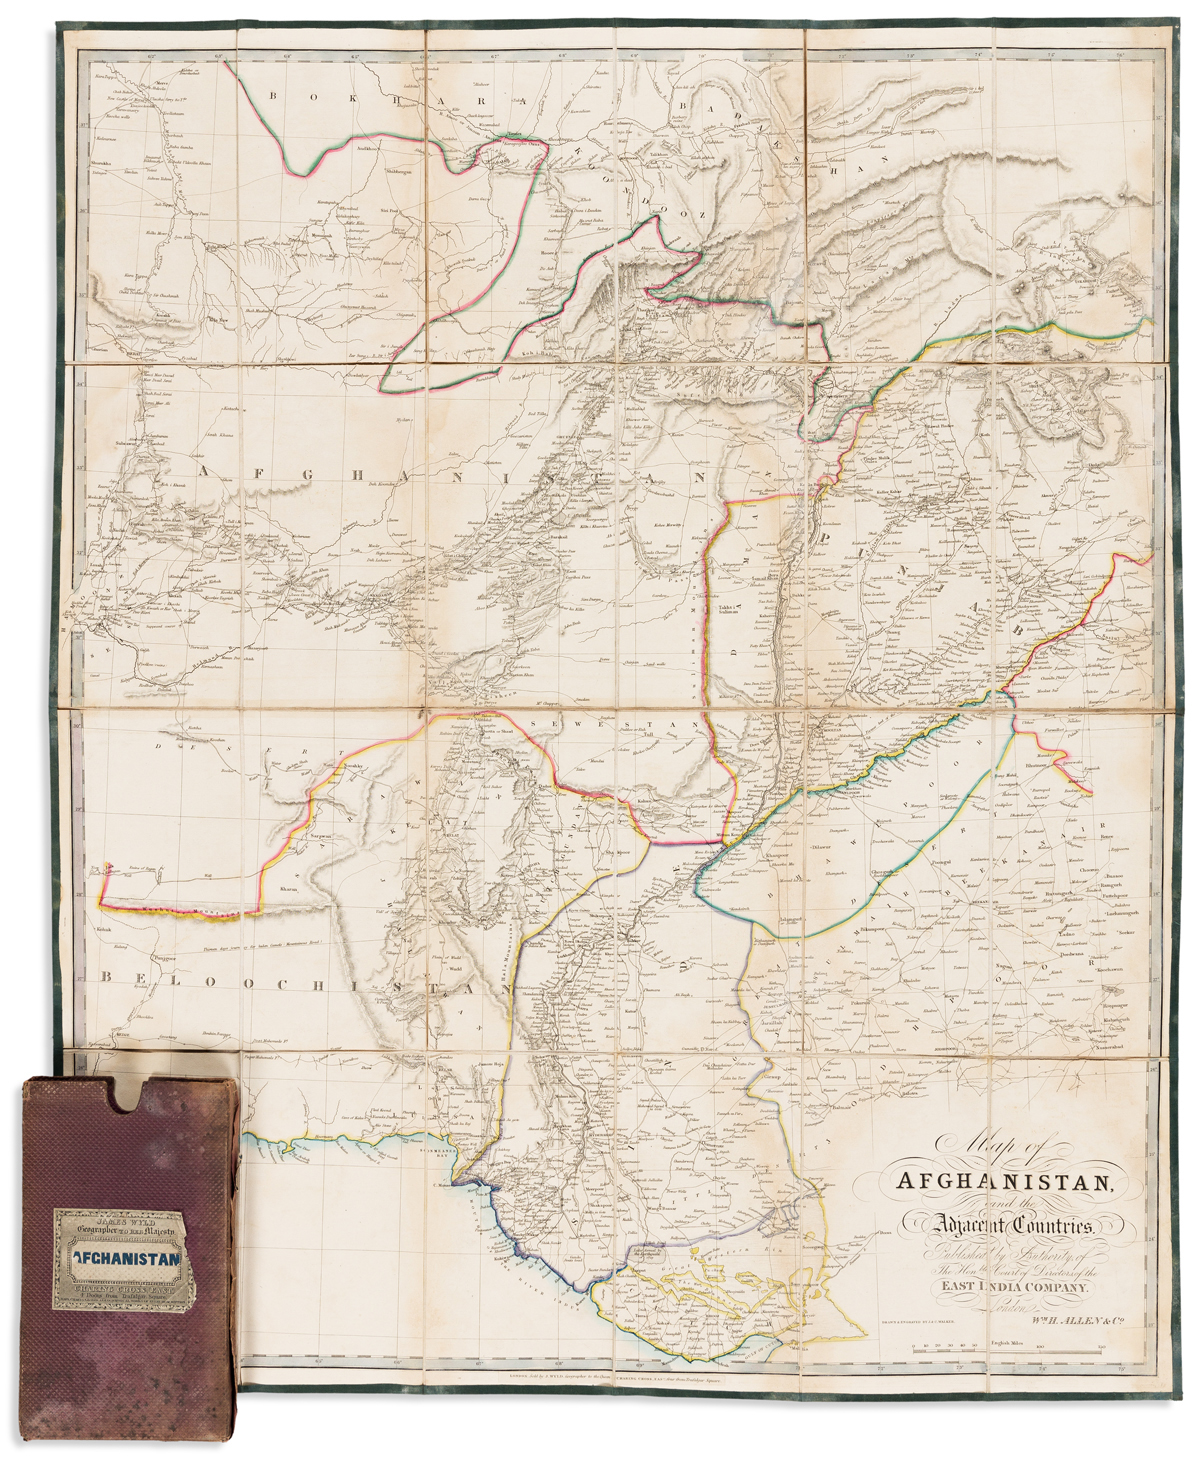 (AFGHANISTAN.) Allen, William H. Map of Afghanistan and the Adjacent Countries